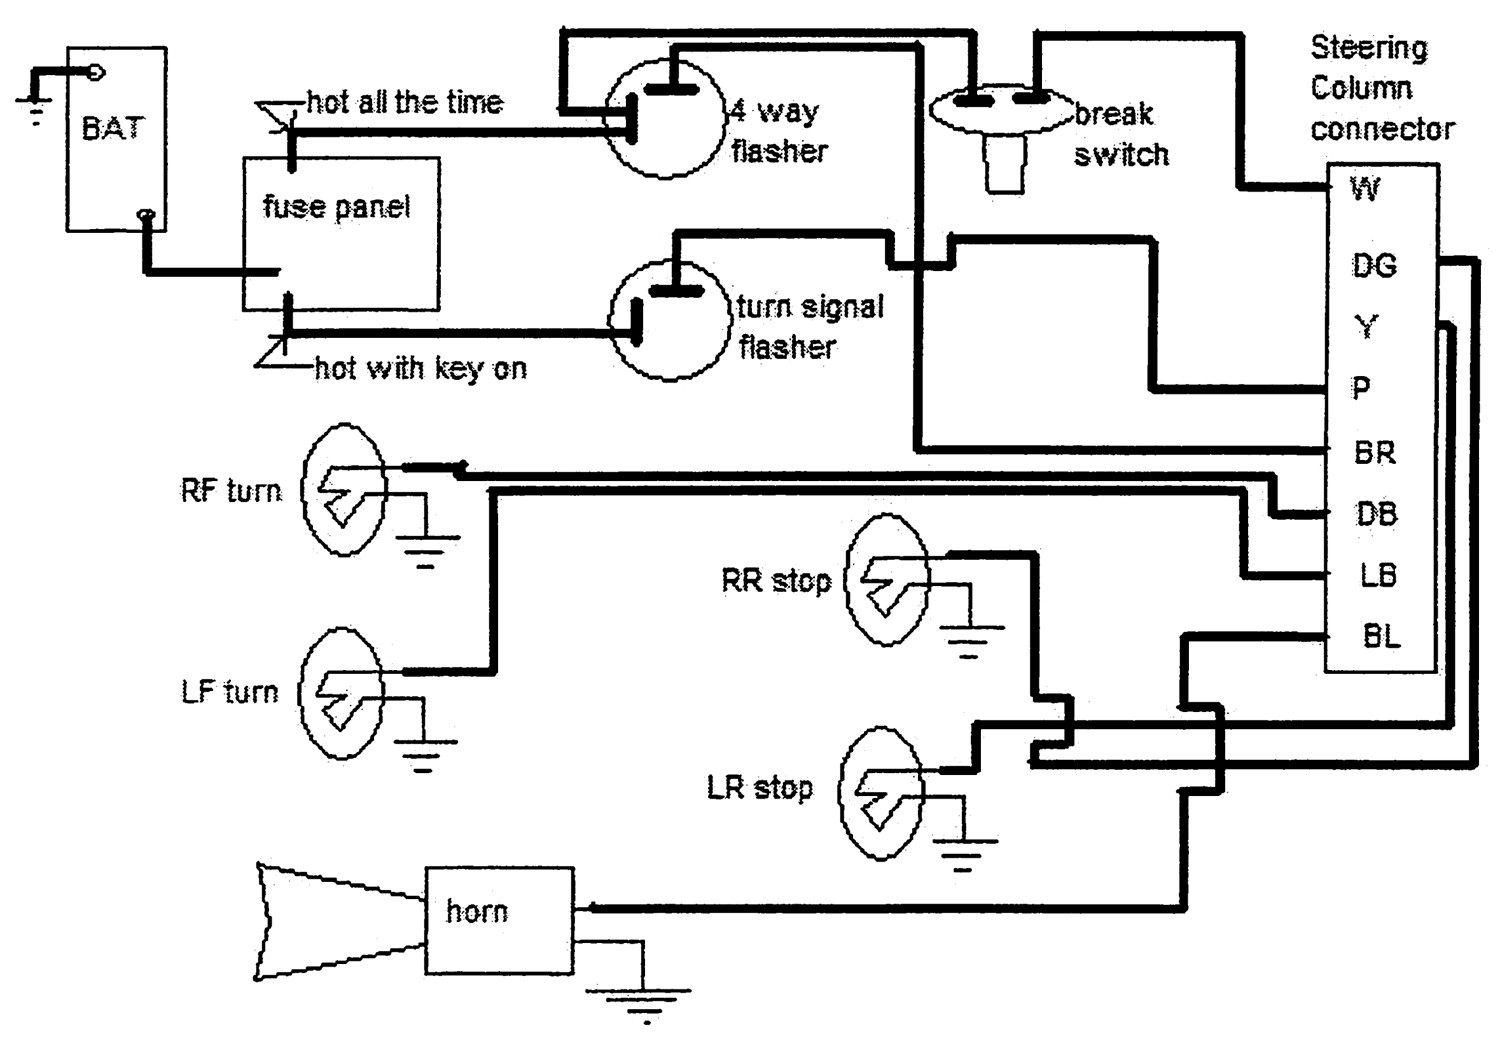 Turn Signal Switch Wiring Diagram if You Need to Change This Connector for Any Reason